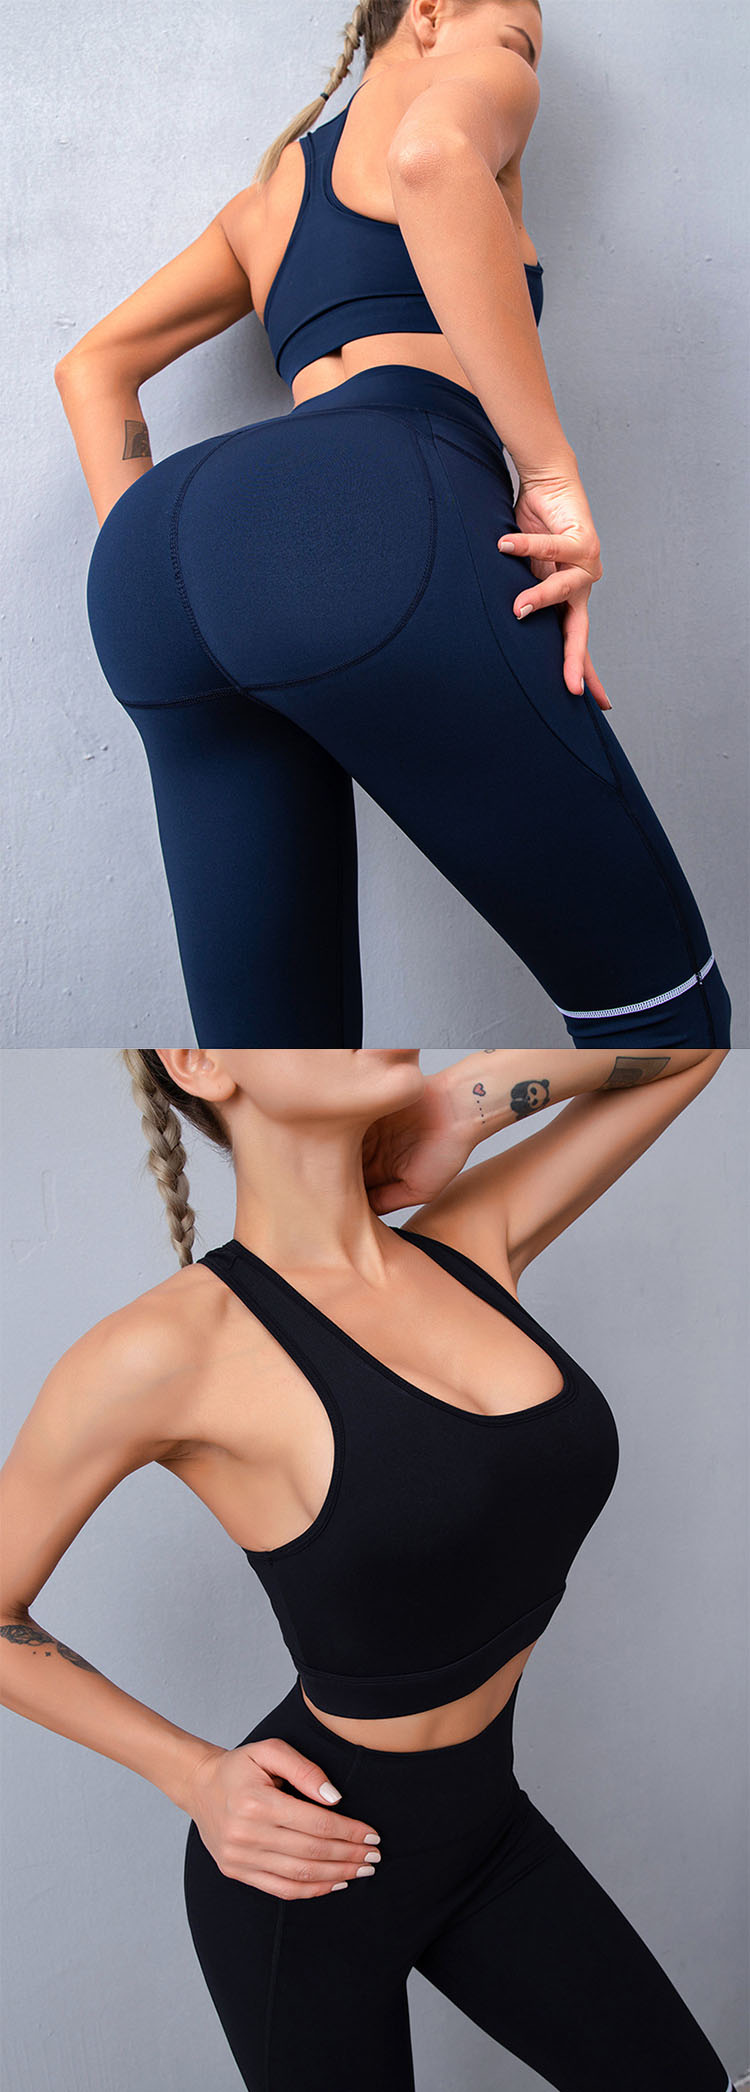 The 2022 spring and summer womens black gym leggings style focuses on creating a simple and long-lasting design